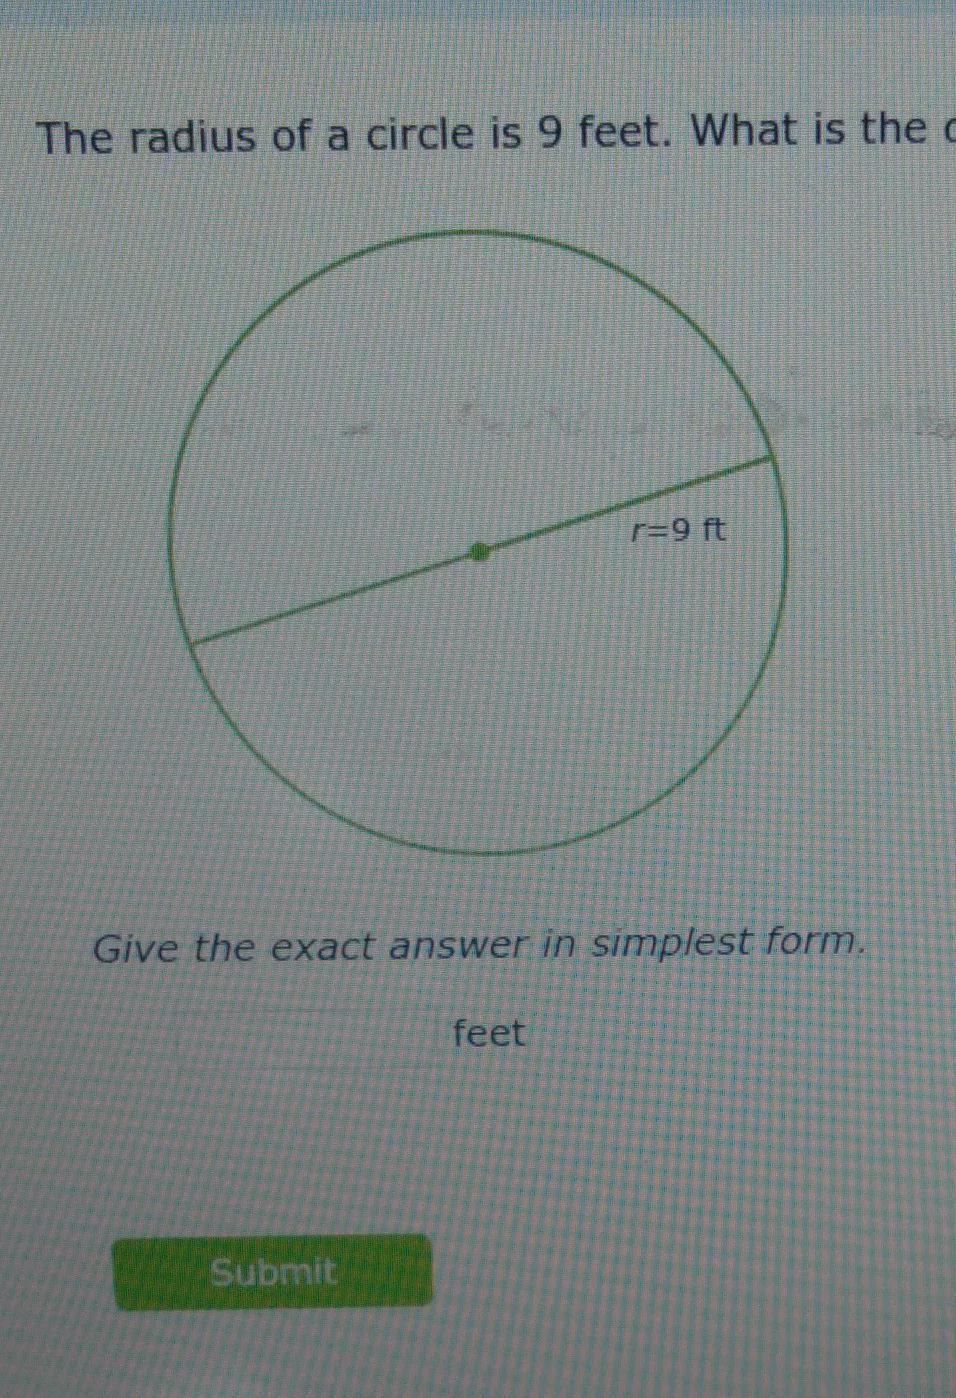 The Radius Of A Circle Is 9 Feet. What Is The Diameter? Give The Exact Answer In Simplest Form.